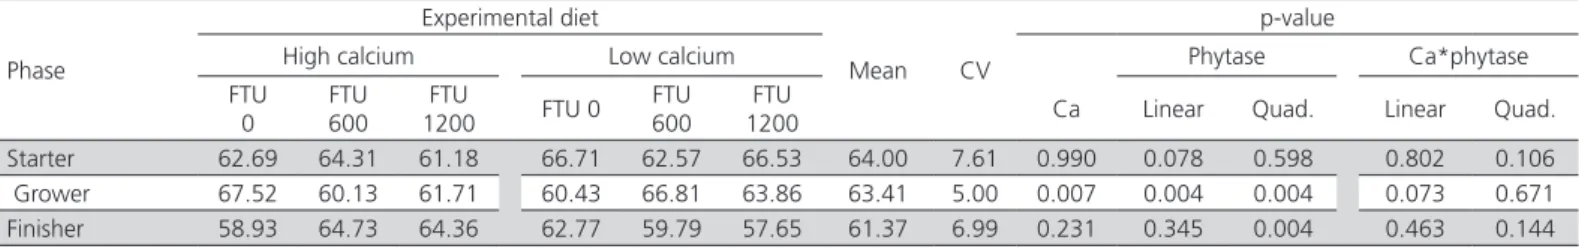 Table 10 – Coefficient of nitrogen retention (%) of broilers fed diets containing two calcium levels and three phytase levels  (FTU/kg) during the starter, grower, and finisher phases.